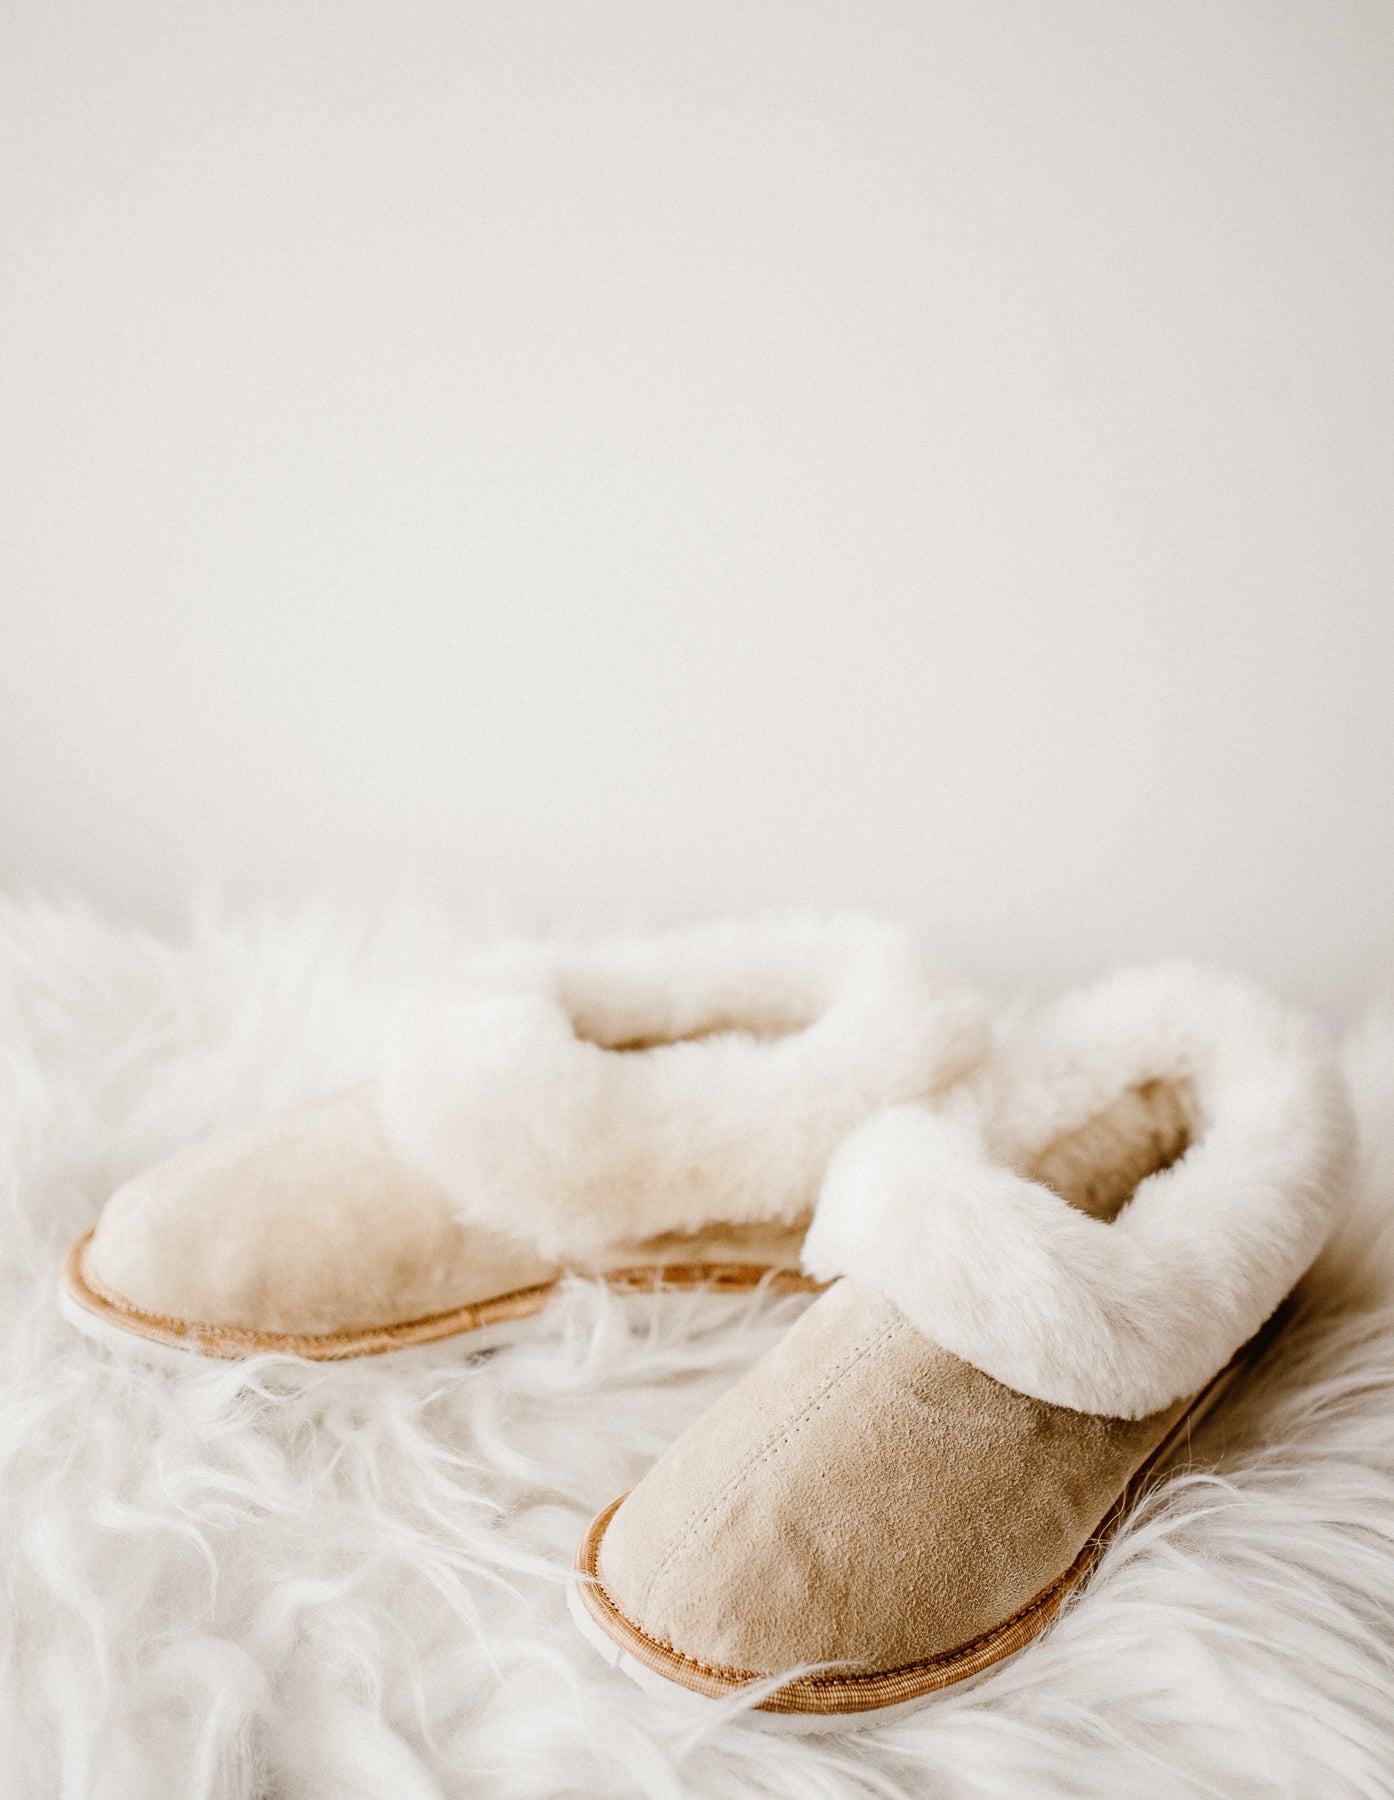 Beige sheepskin leather with white fur, women indoor boots, rubber sole made by Bamboshe, soft sheep leather